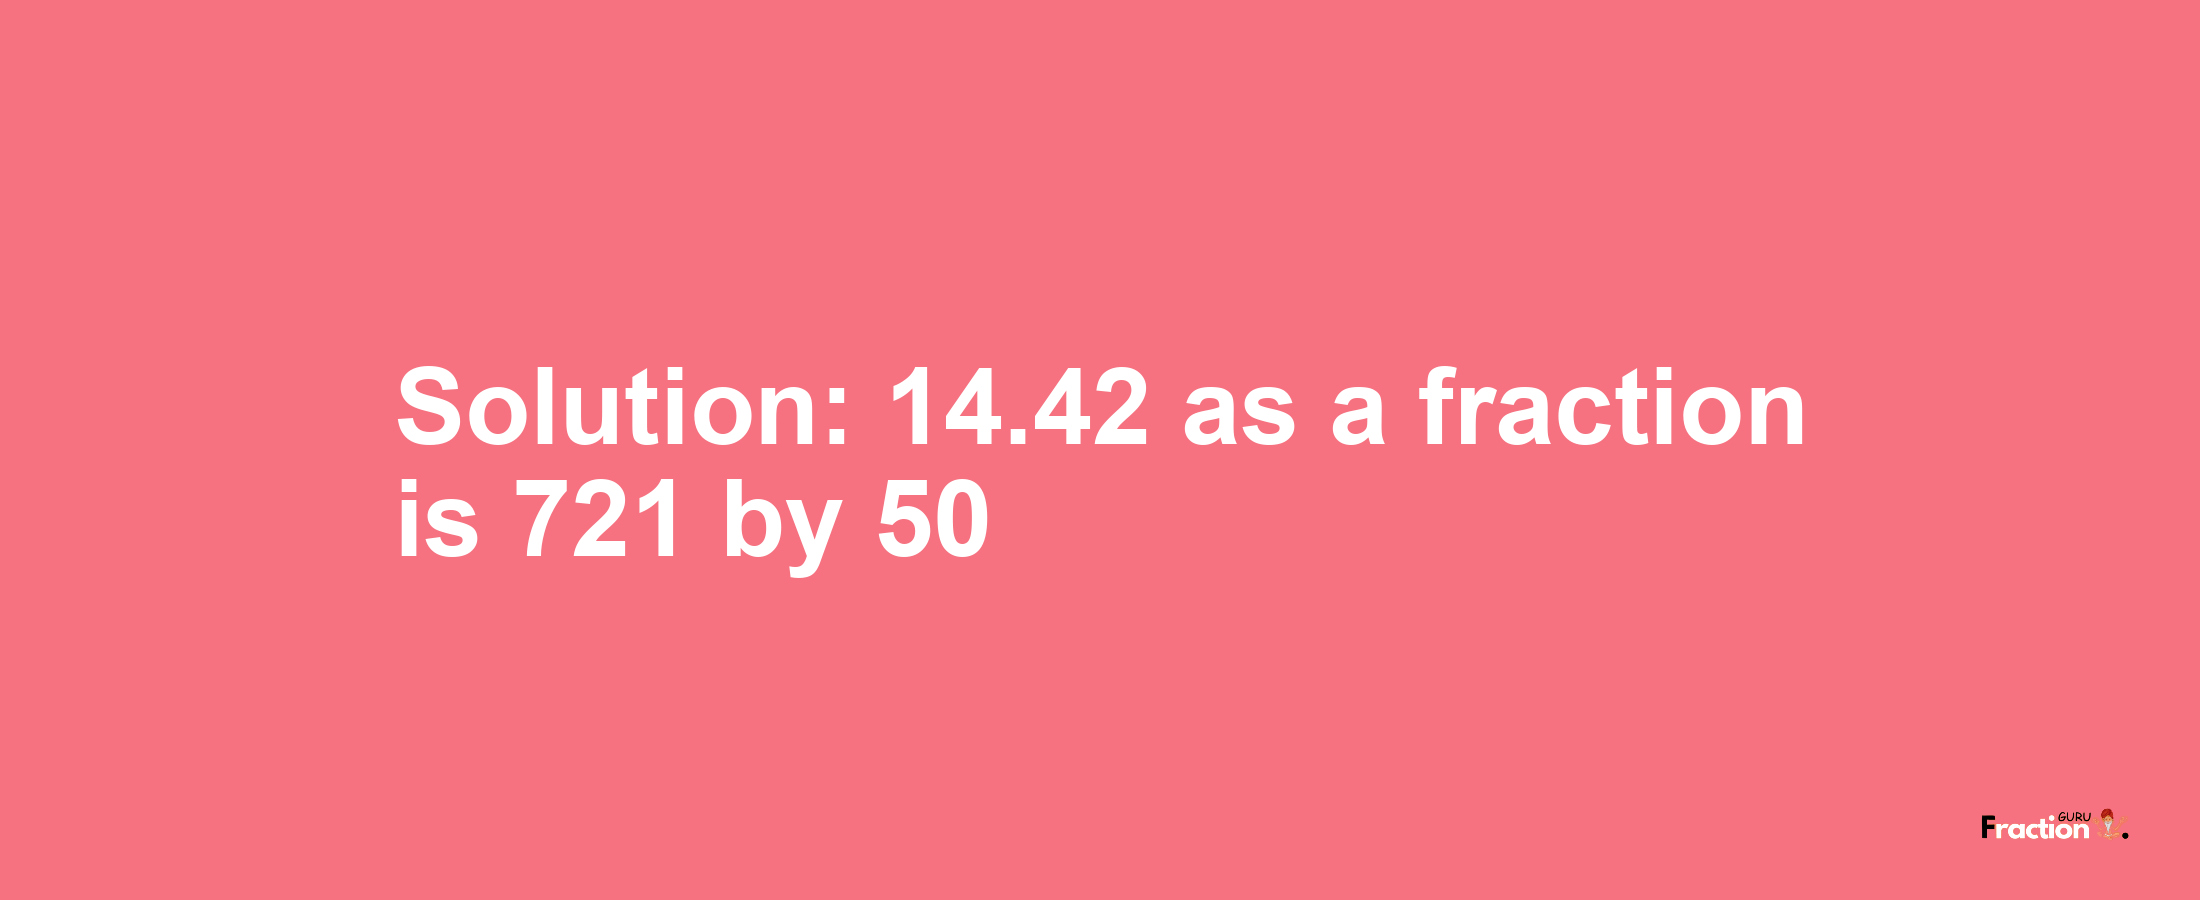 Solution:14.42 as a fraction is 721/50